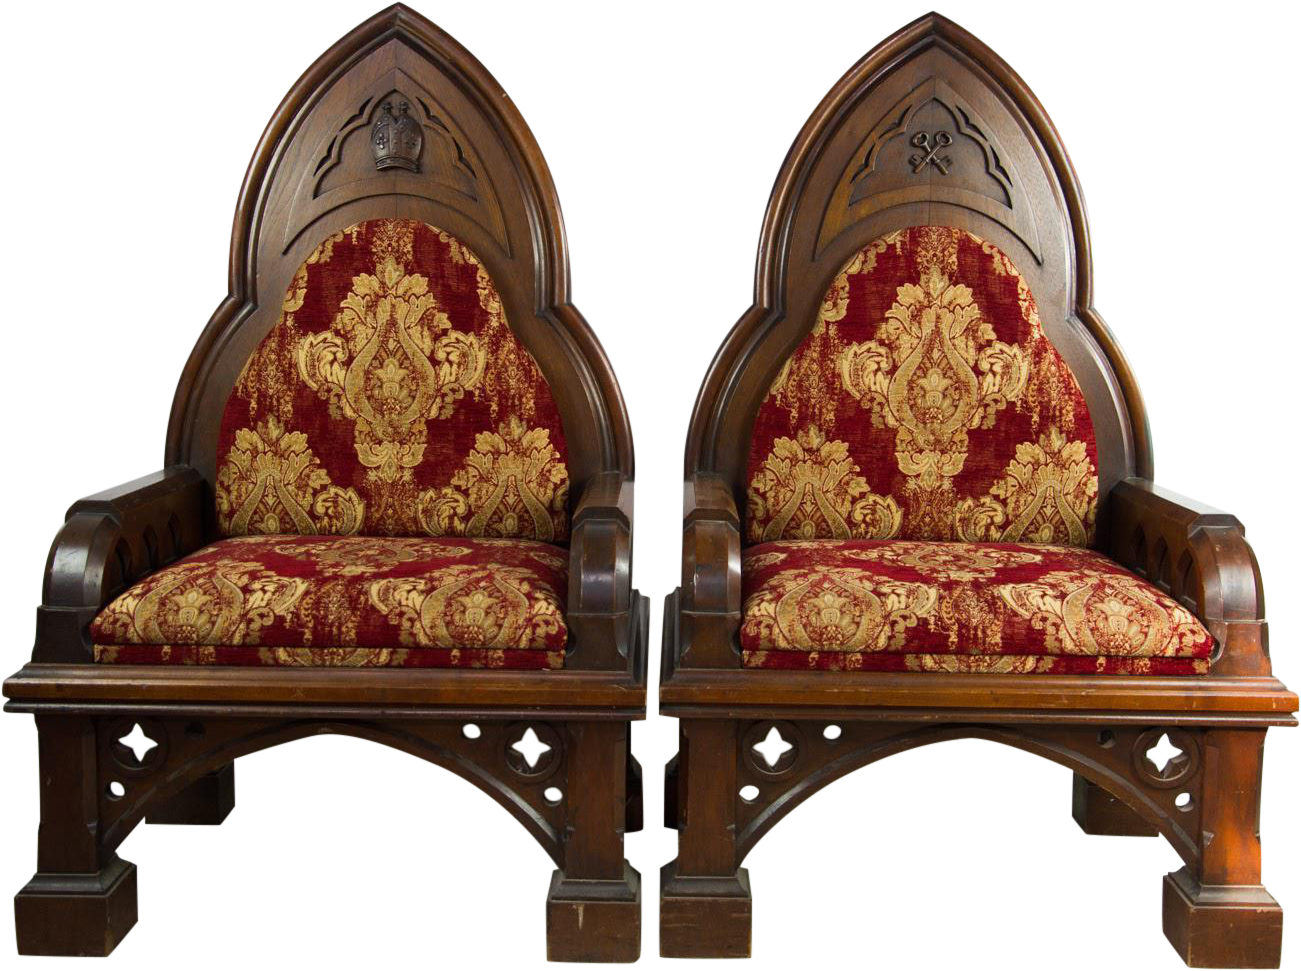 A Pair Of Chairs With Gold And Red Cushions